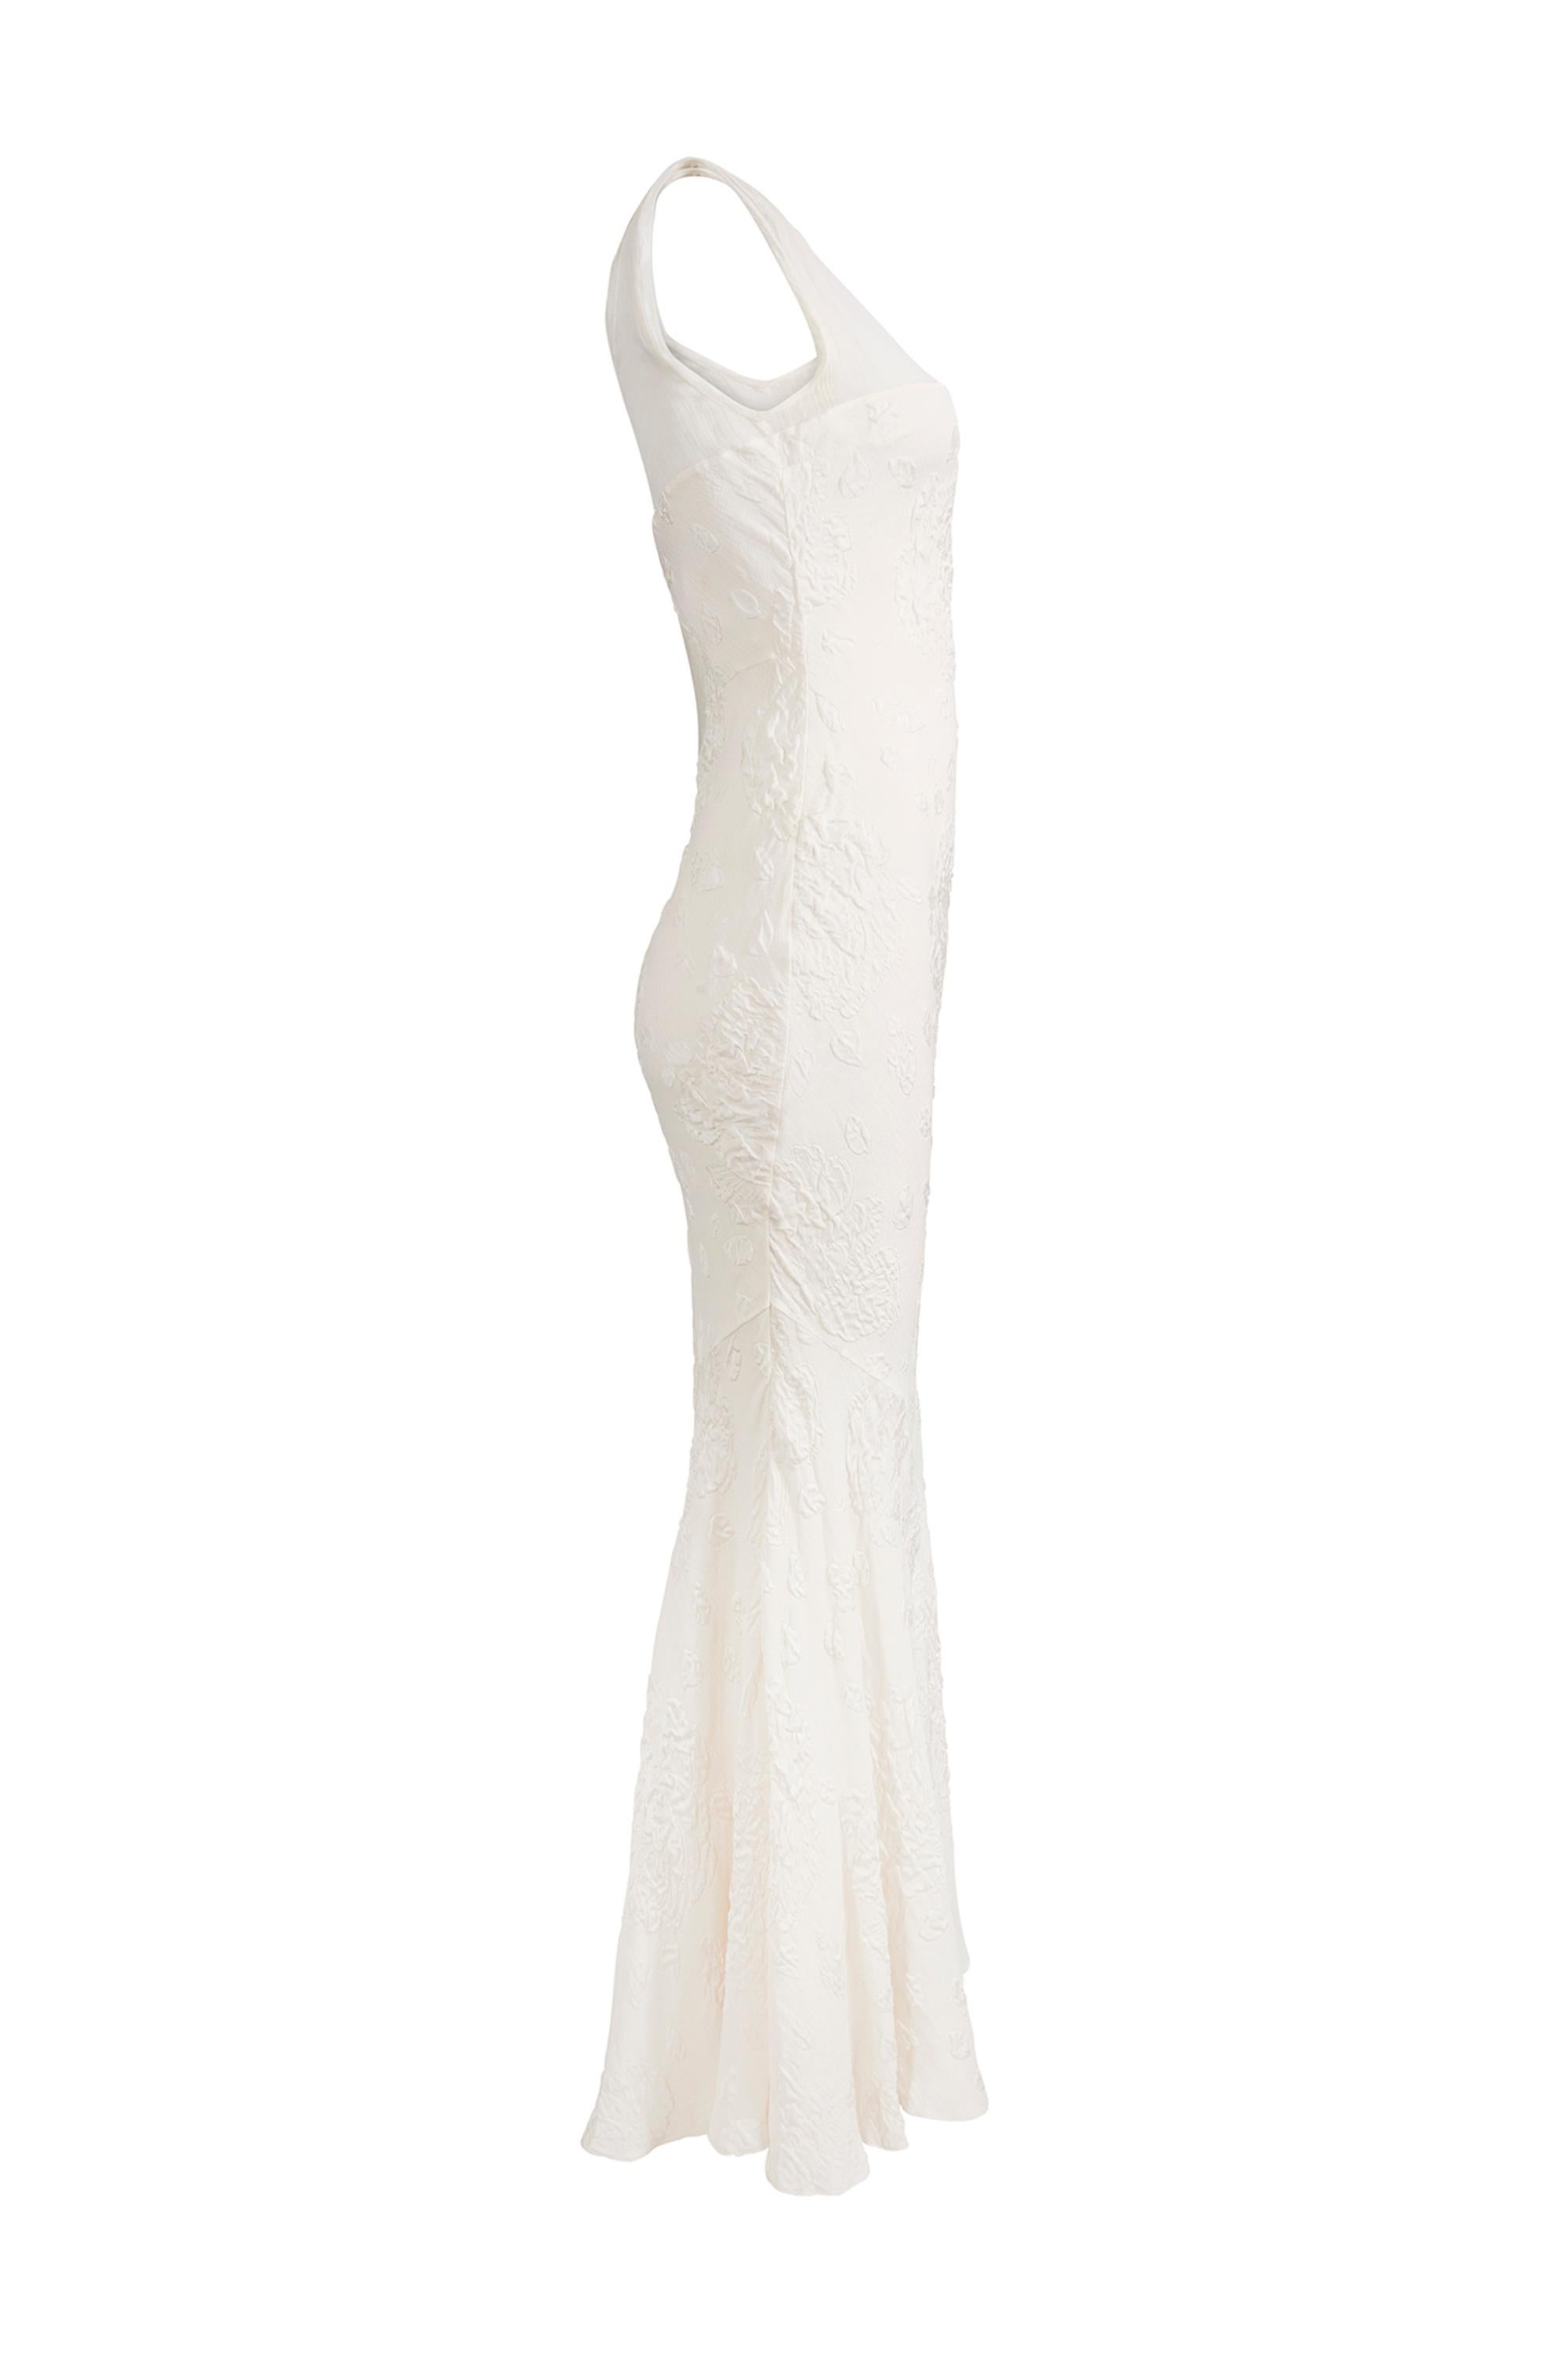 This early 2000's bridal gown is by acclaimed British designer John Galliano and is in excellent vintage condition. The white silk fabric is embossed with a tiny herringbone pattern which features as a subtle background texture. The beautiful rose